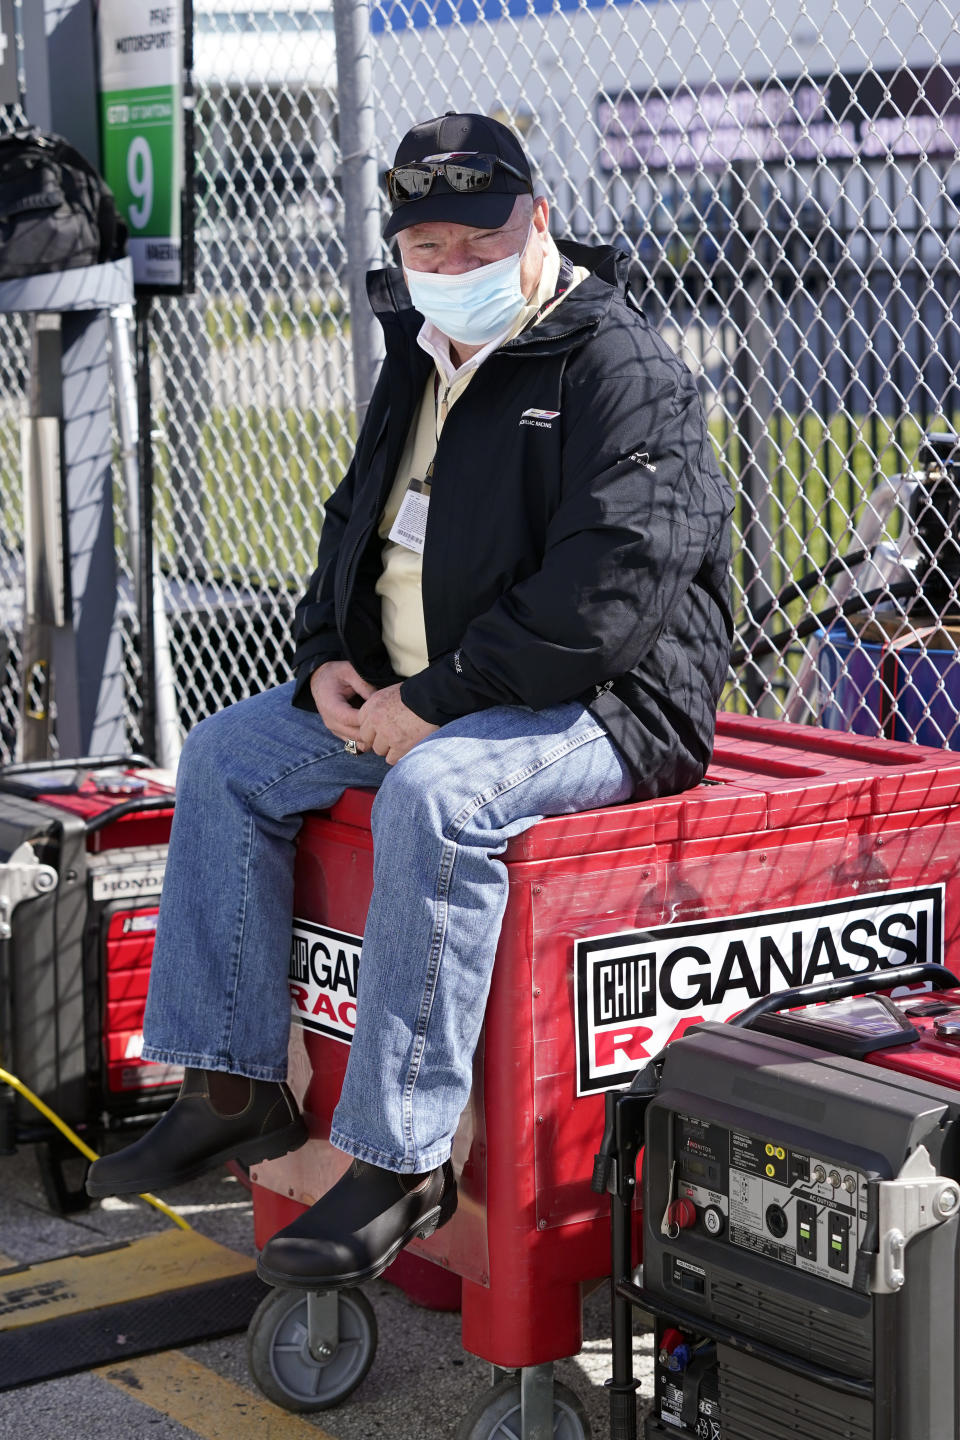 Chip Ganassi, owner of Chip Ganassi Racing, takes a break outside his pit stall during a practice session for the Rolex 24 hour race at Daytona International Speedway, Friday, Jan. 29, 2021, in Daytona Beach, Fla. (AP Photo/John Raoux)